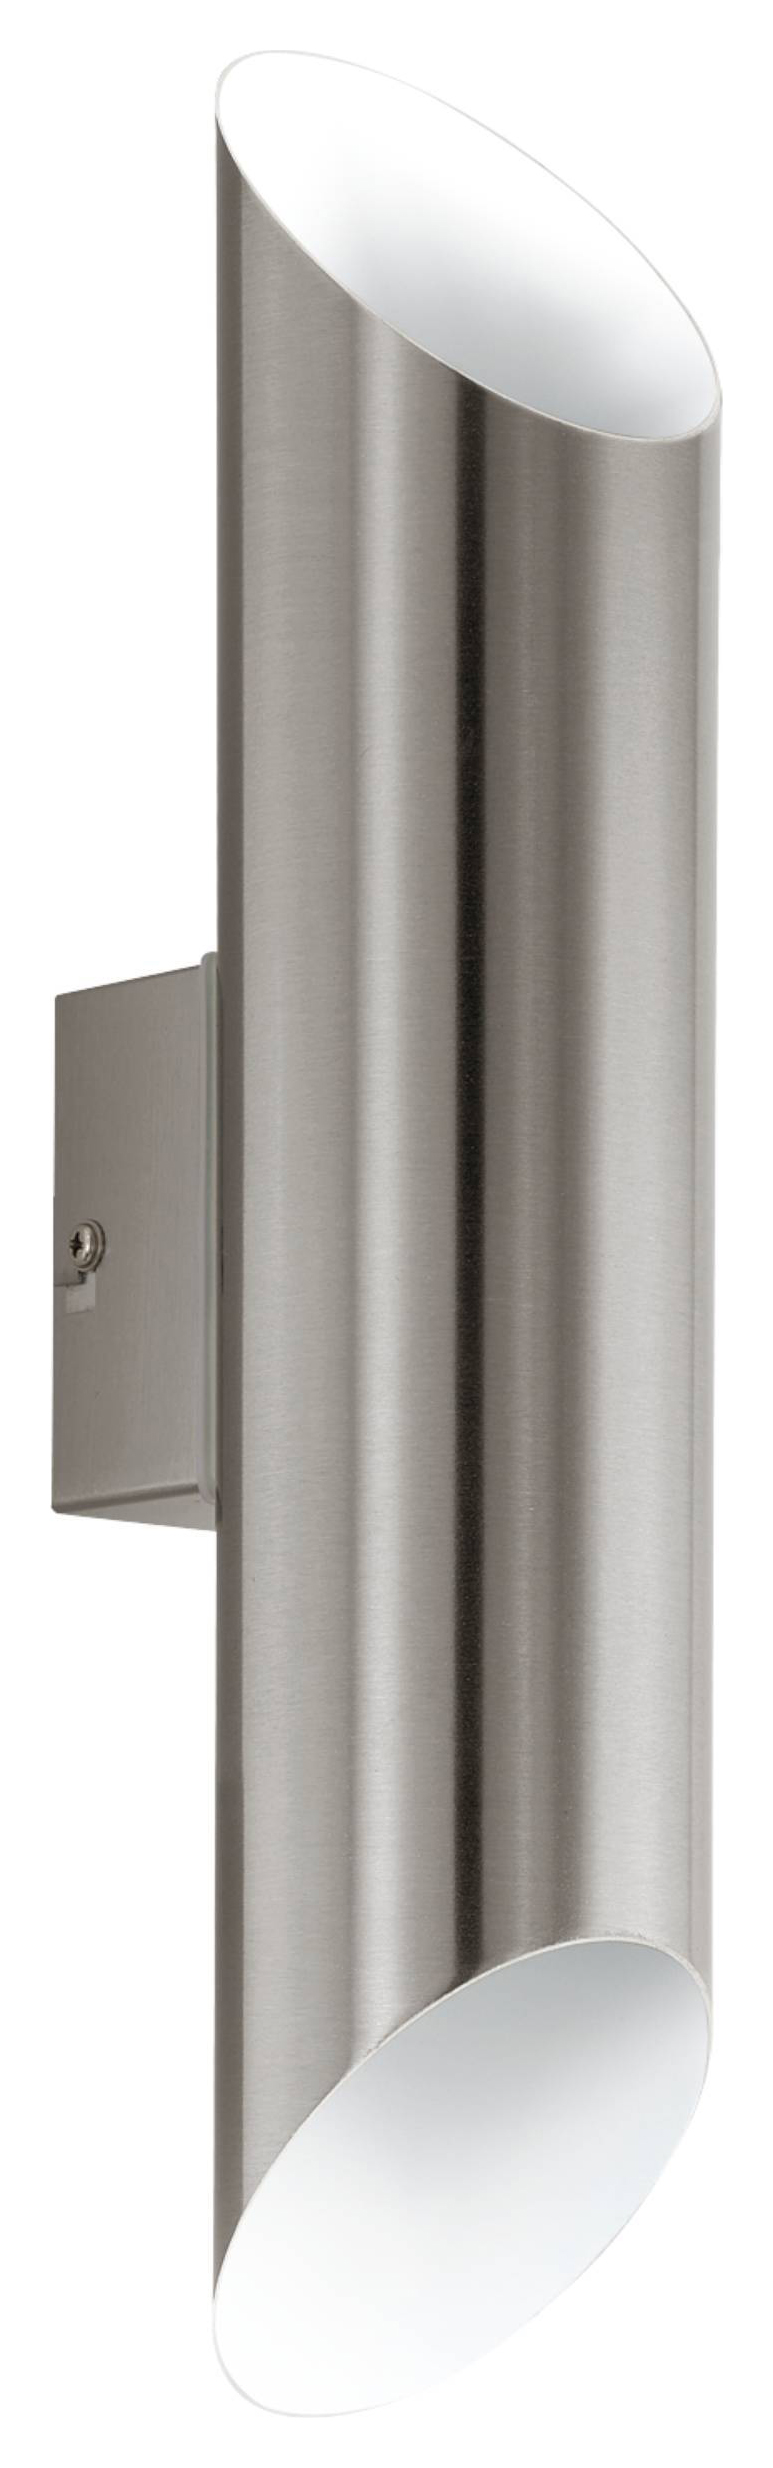 Image of Eglo GU10 Agolada Outdoor Up / Down Wall Light - Stainless Steel